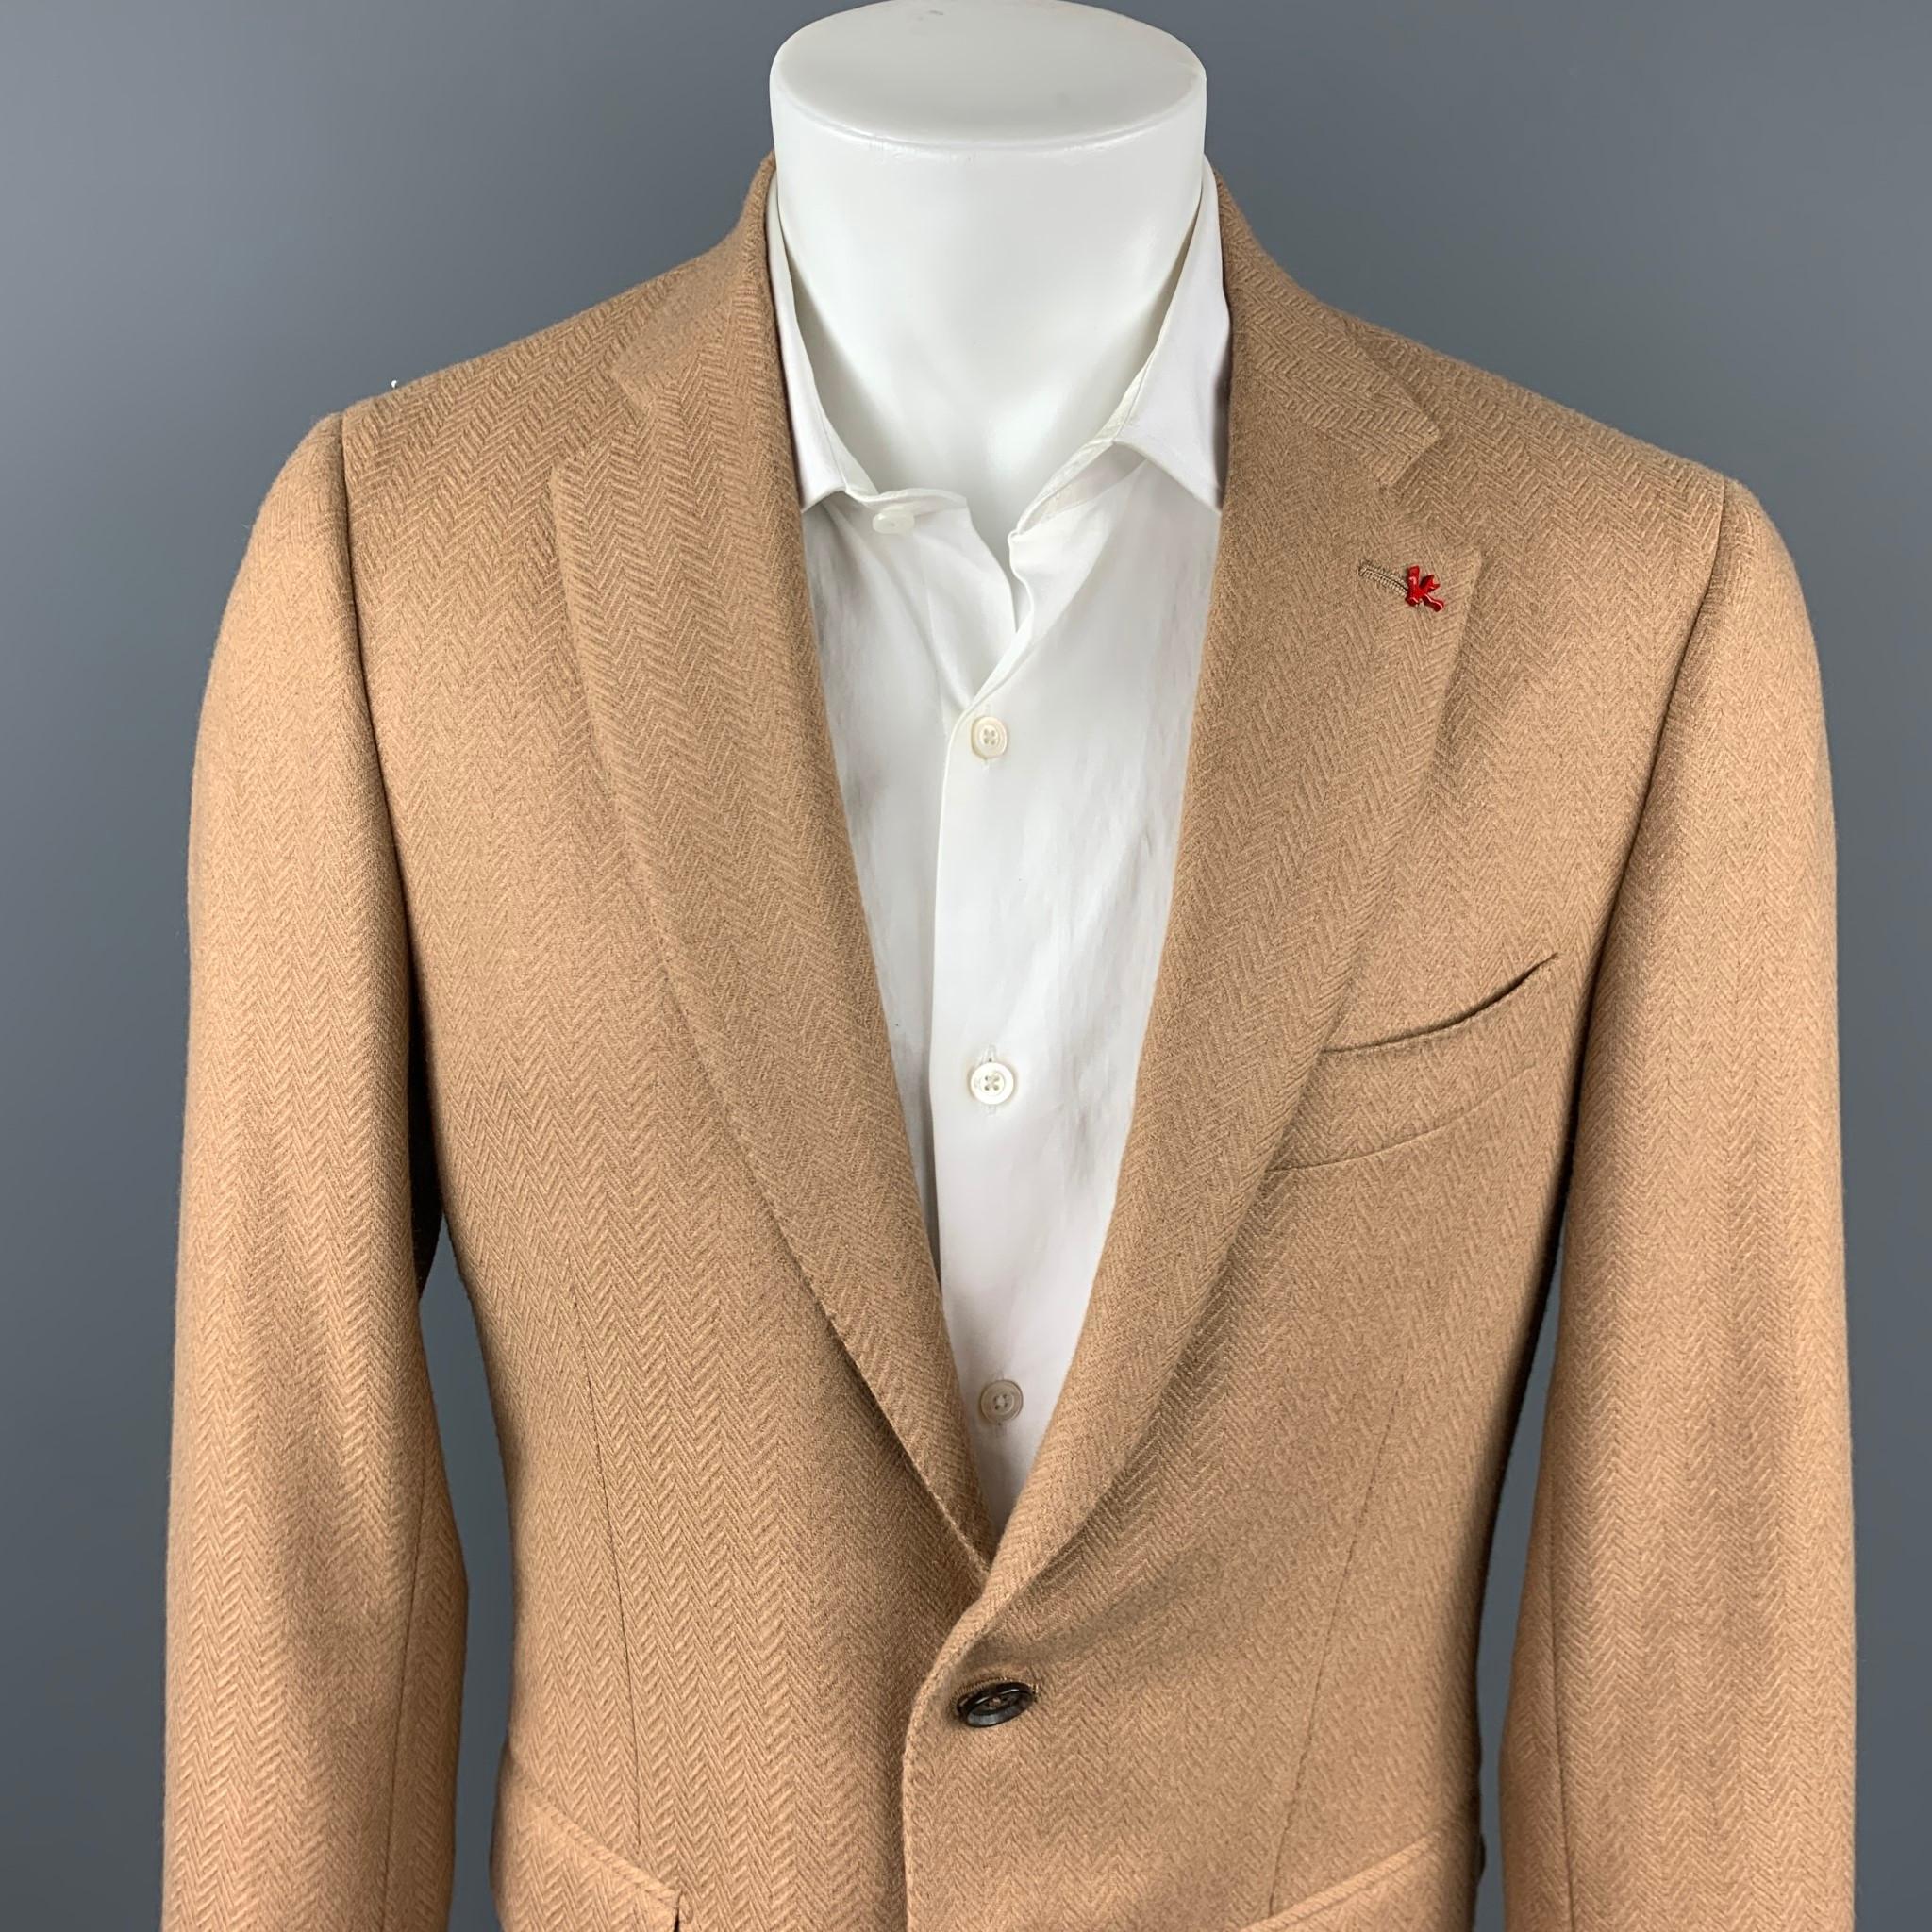 ISAIA sport coat comes in a camel herringbone camel hair with a full liner featuring a notch lapel, flap pockets, and a two button closure. Made in Italy.

Very Good Pre-Owned Condition.
Marked: 50

Measurements:

Shoulder: 17 in.
Chest: 40